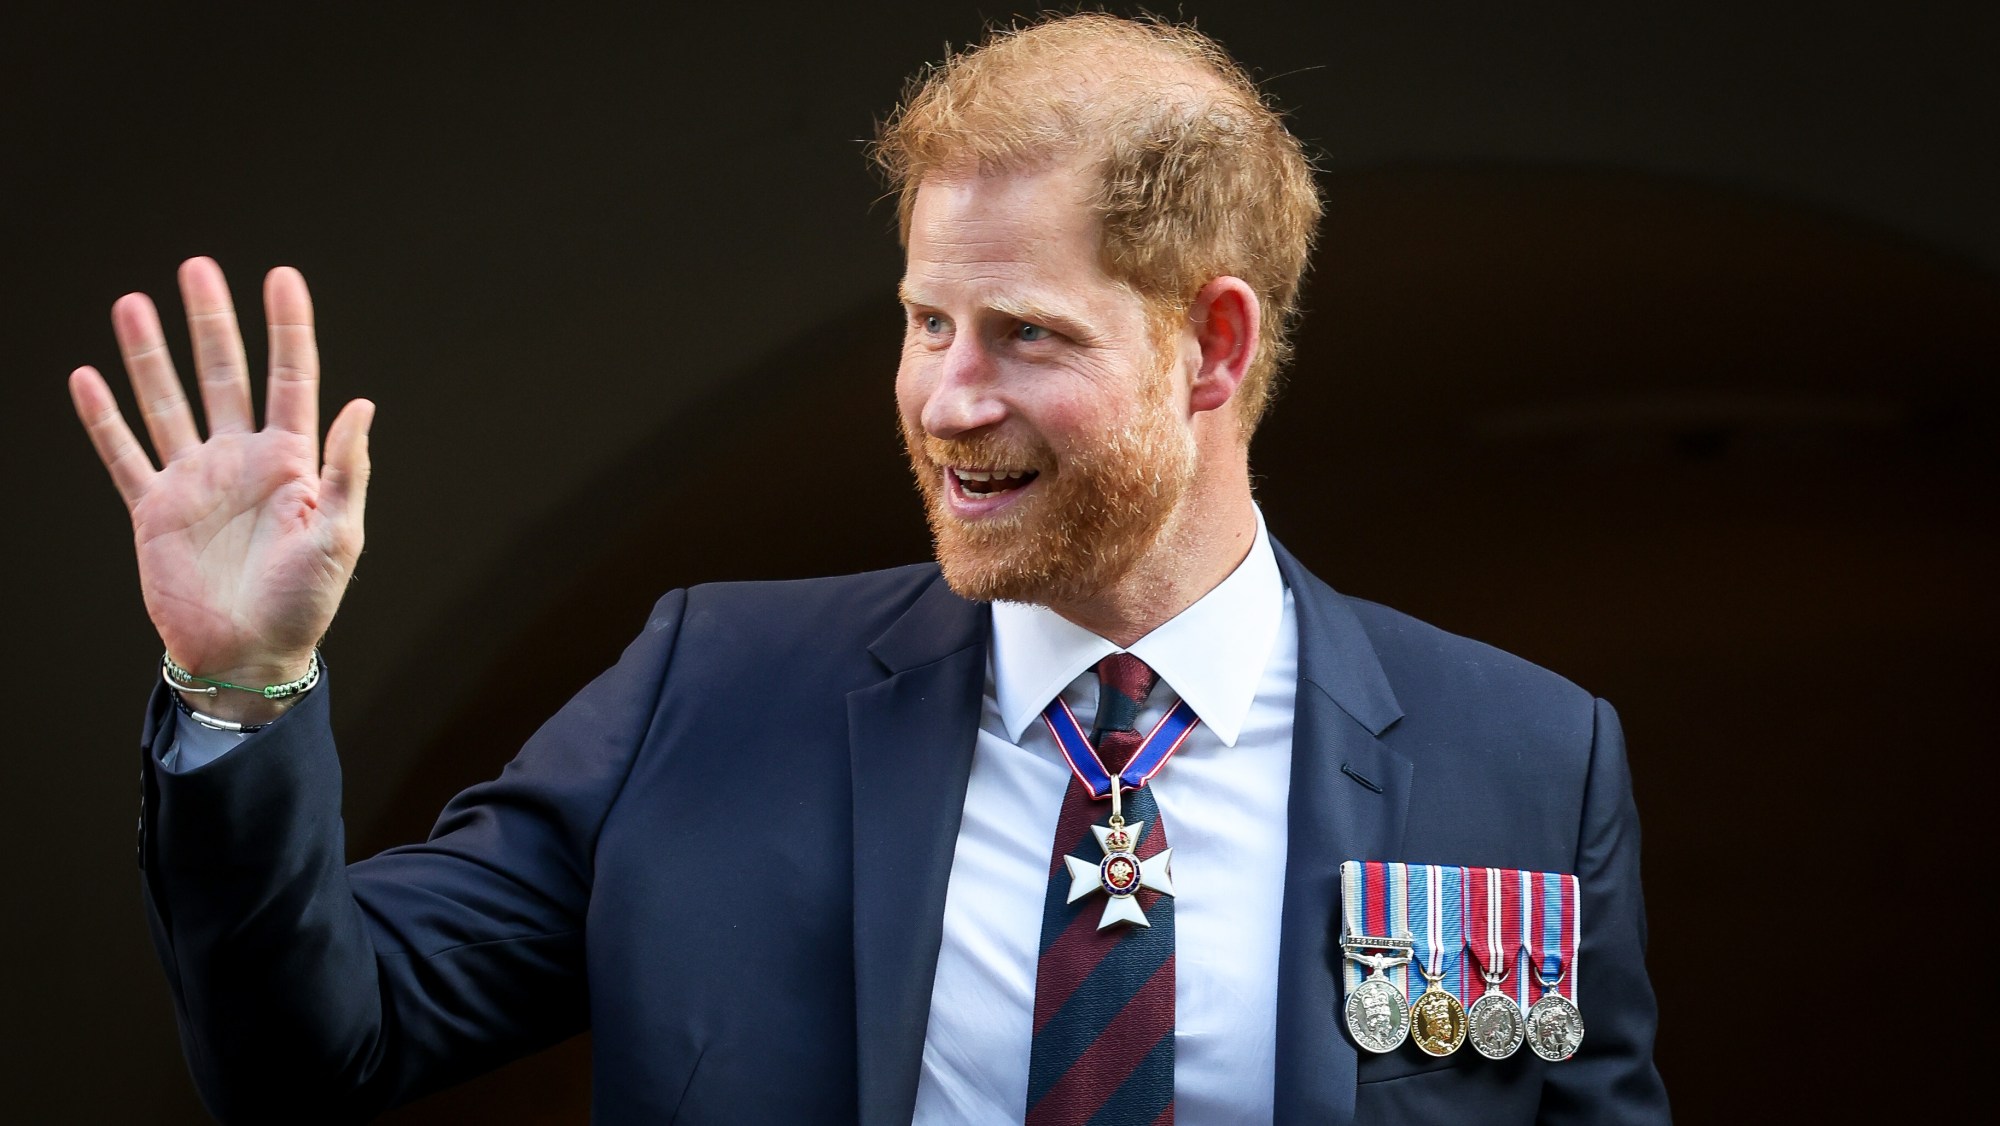 Prince Harry, The Duke of Sussex, at The Invictus Games